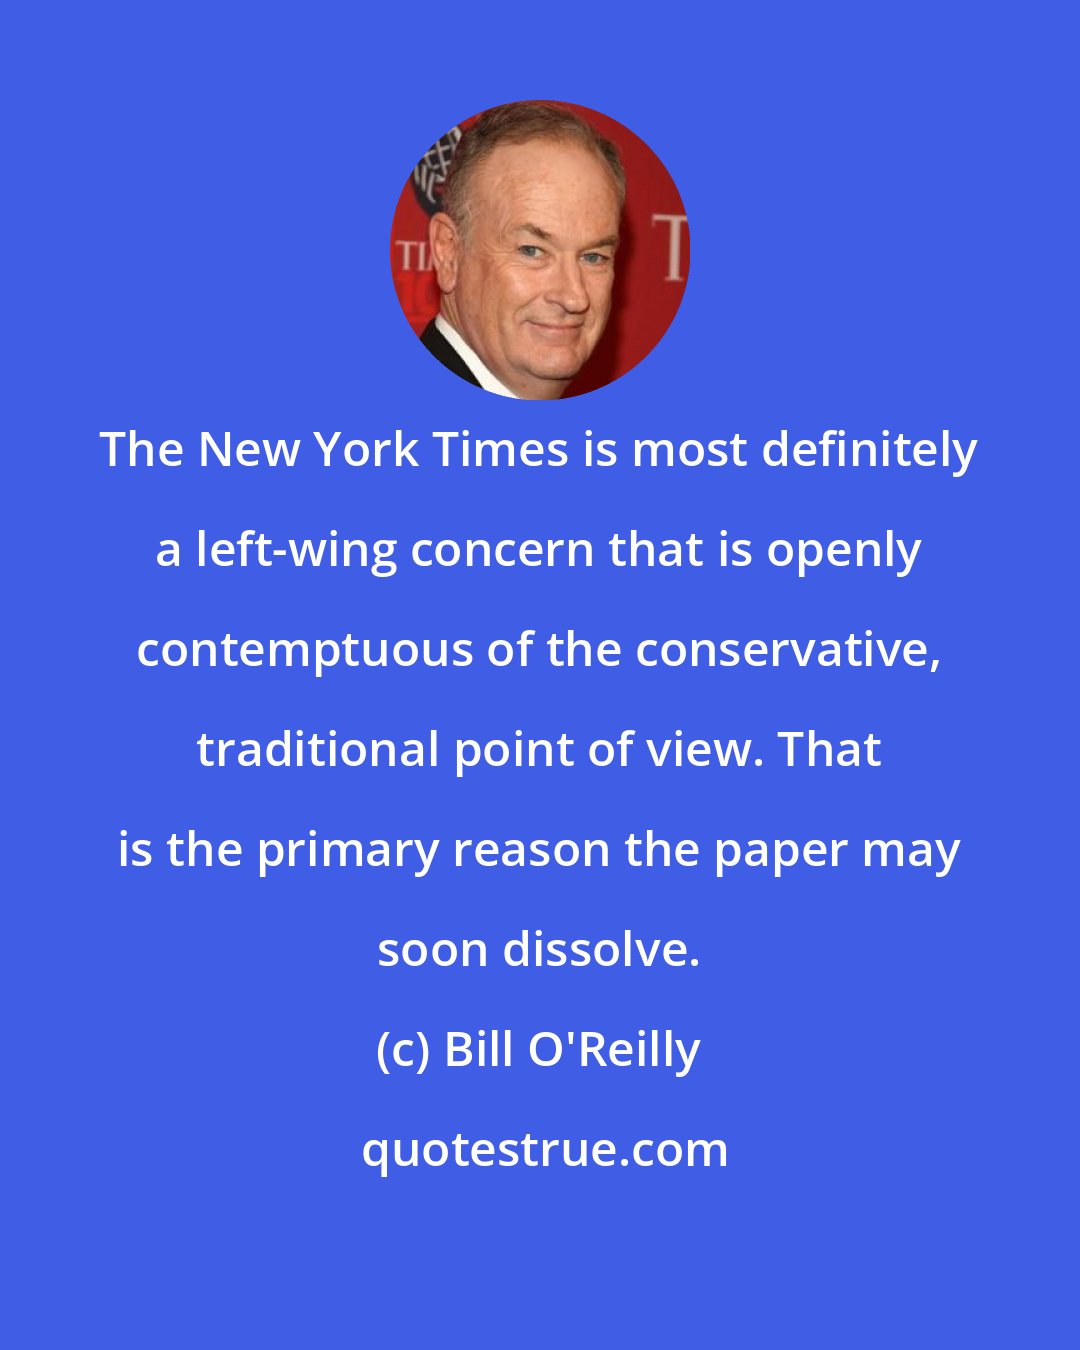 Bill O'Reilly: The New York Times is most definitely a left-wing concern that is openly contemptuous of the conservative, traditional point of view. That is the primary reason the paper may soon dissolve.